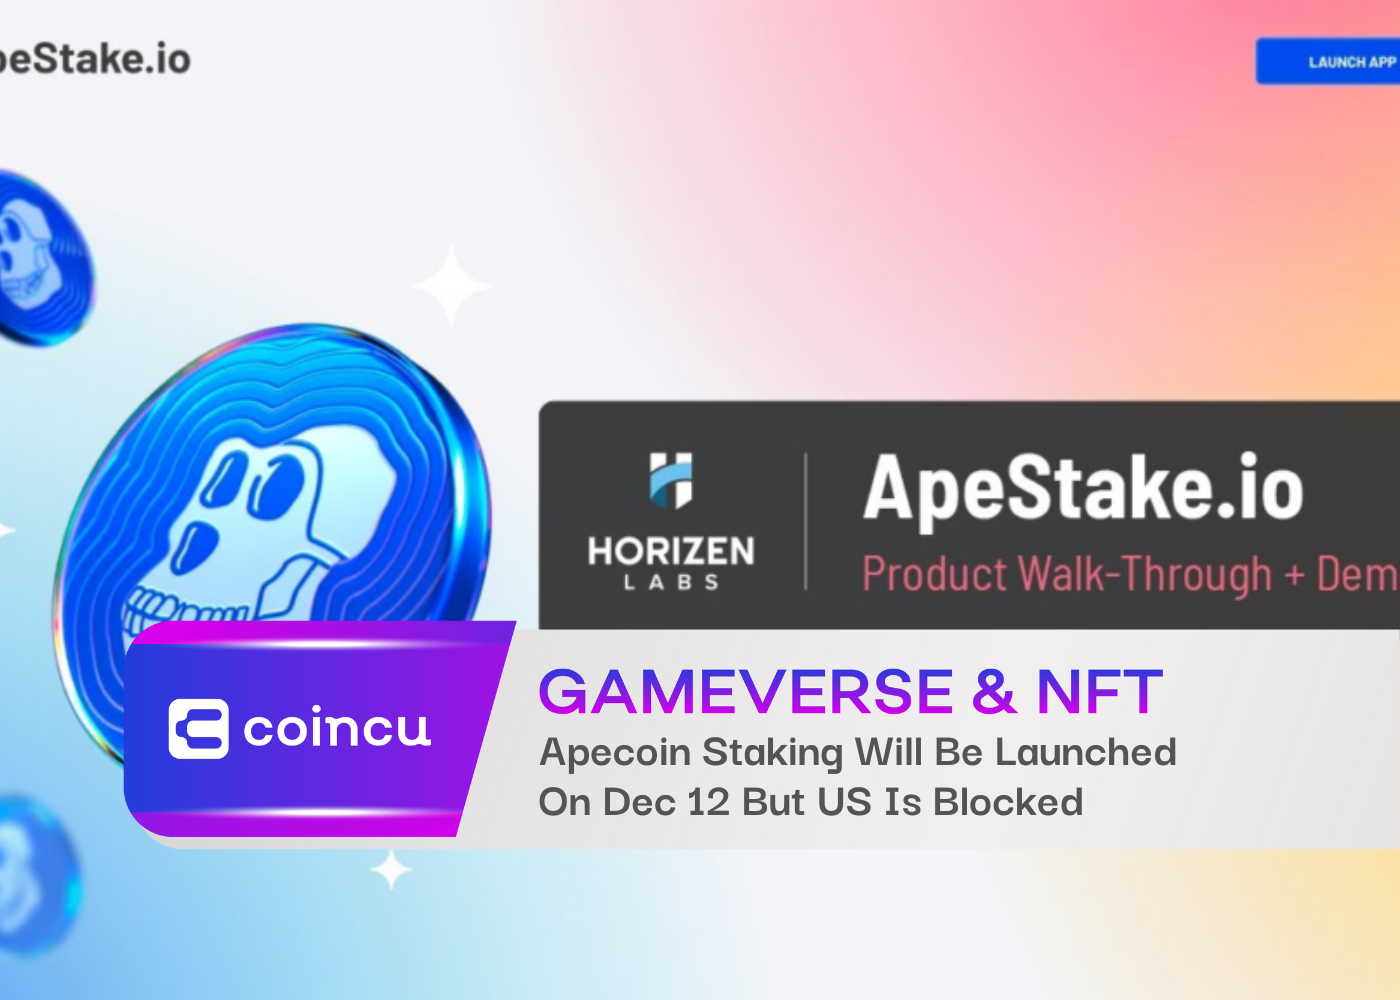 Apecoin Staking Will Be Launched On Dec 12 But US Is Blocked